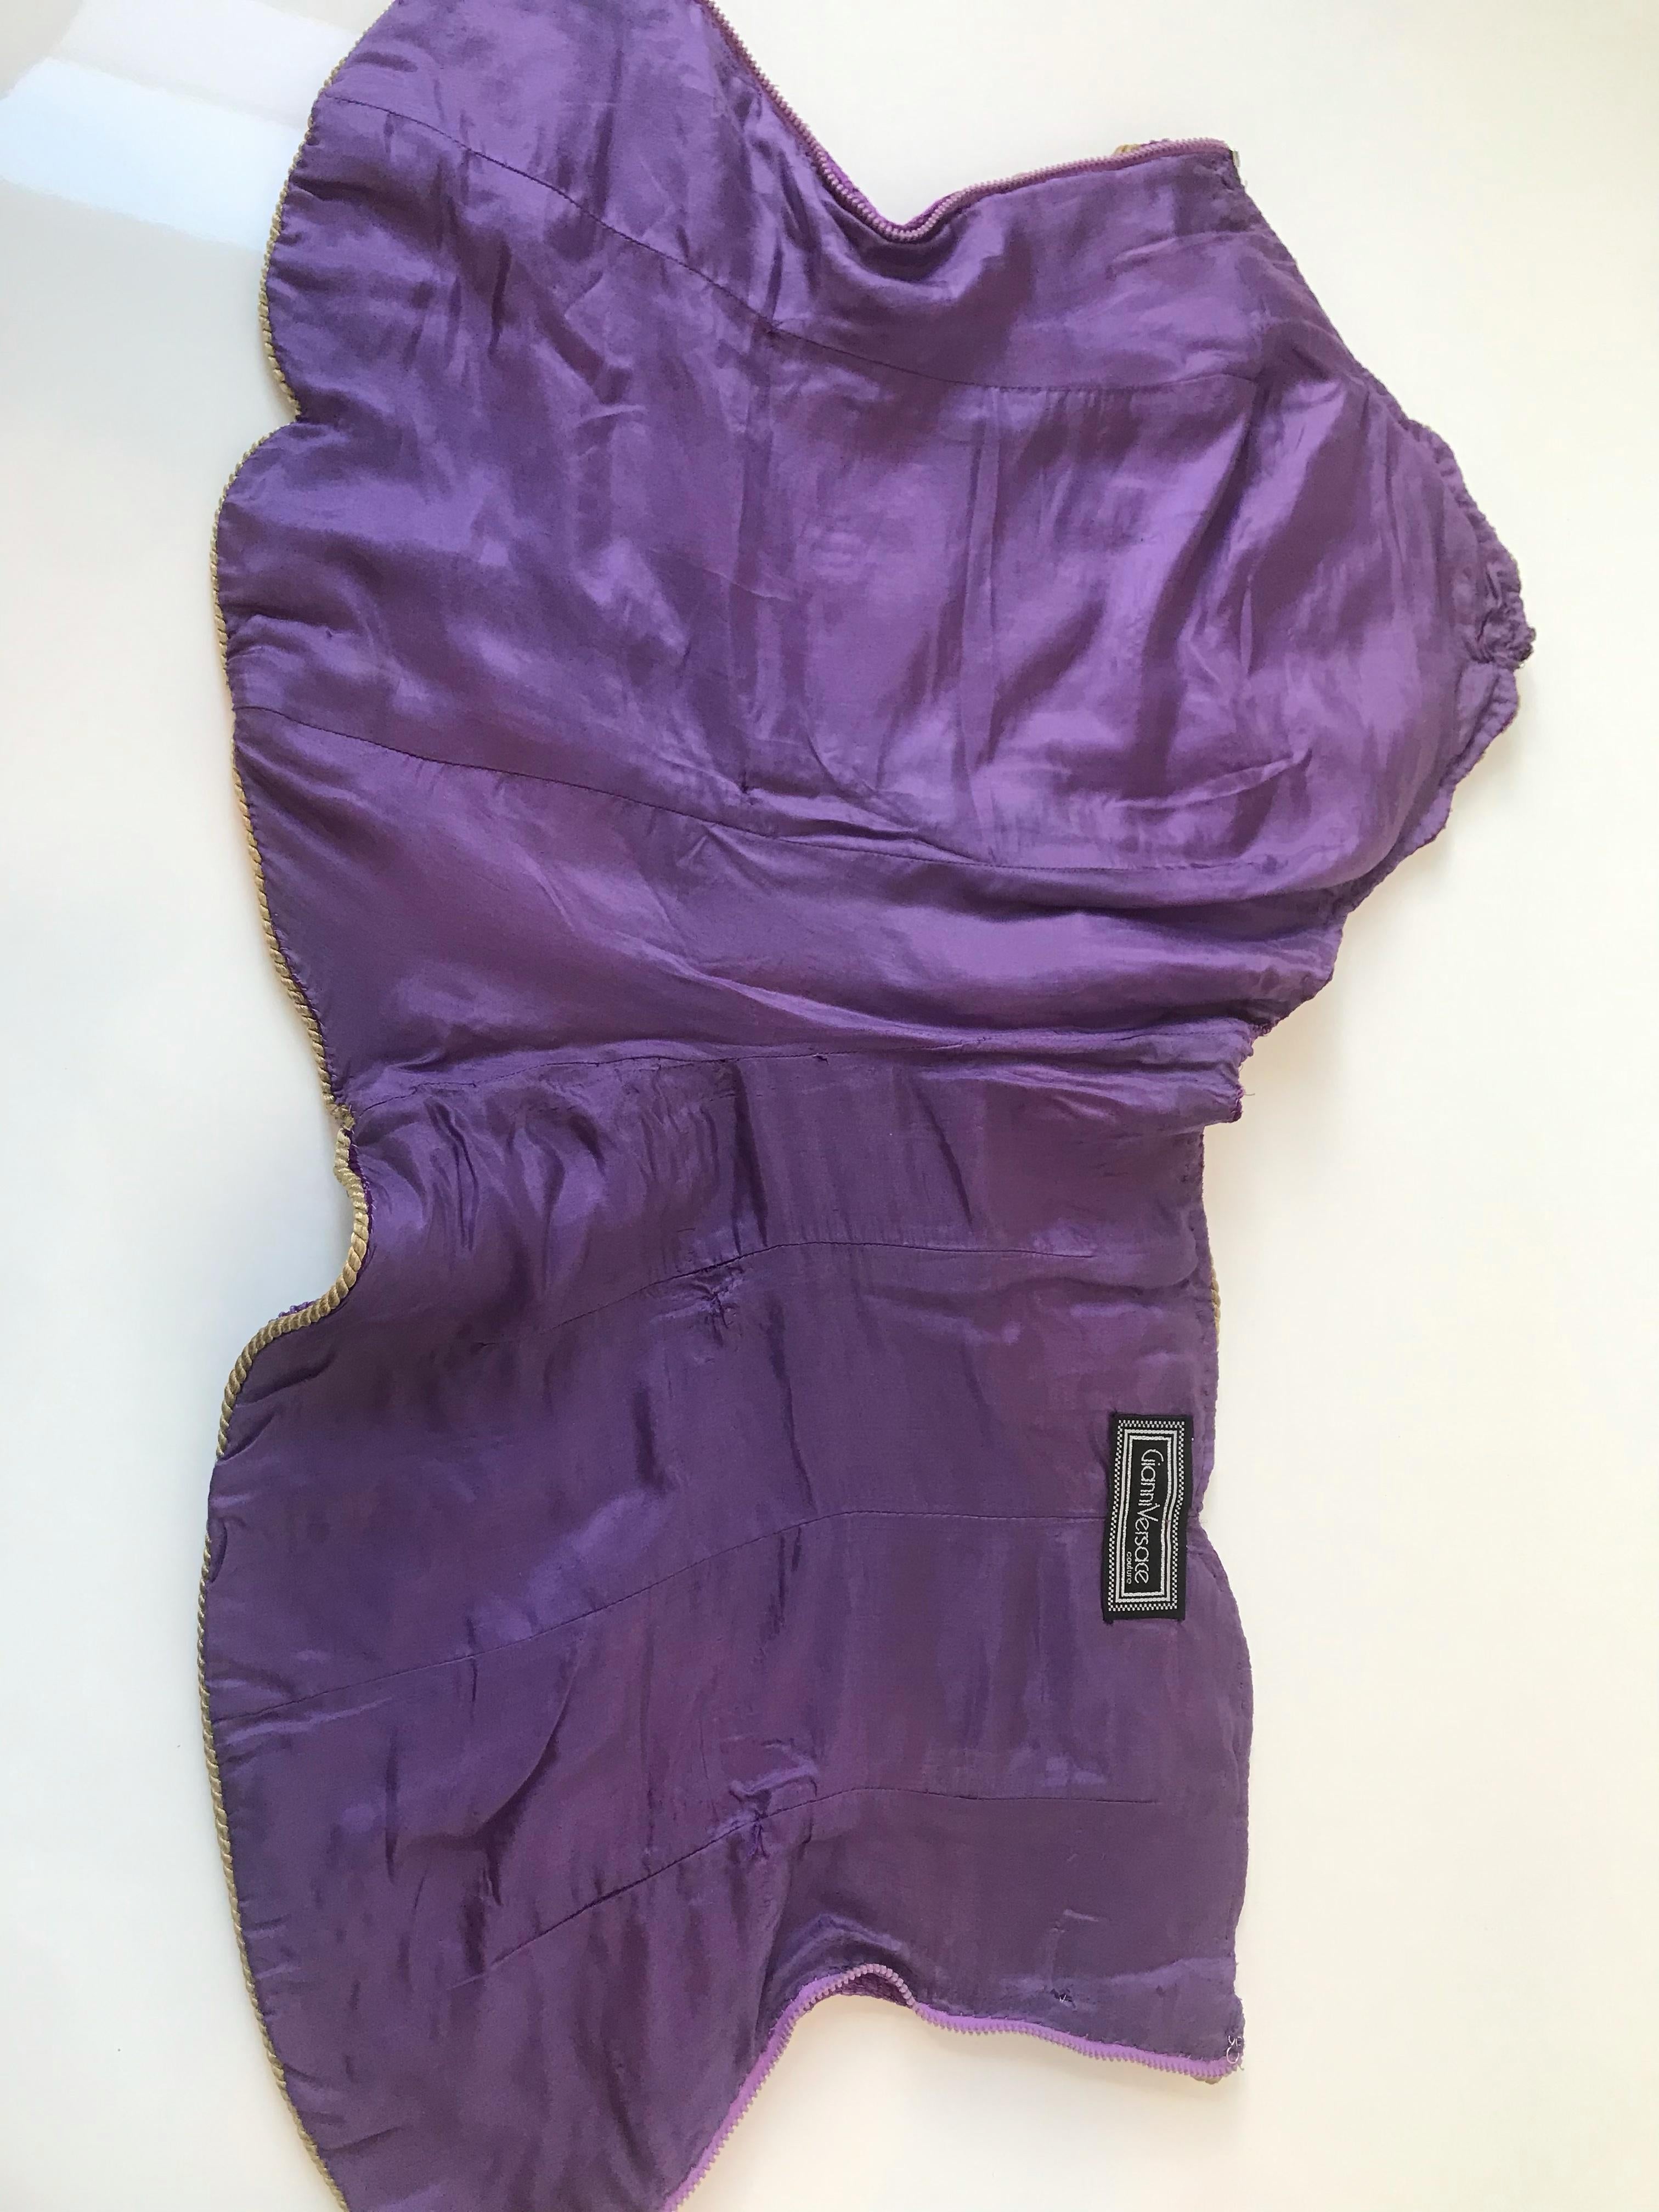 Gianni Versace Couture Purple & Gold Embellished & Embroidered Bustier/Corset For Sale 3